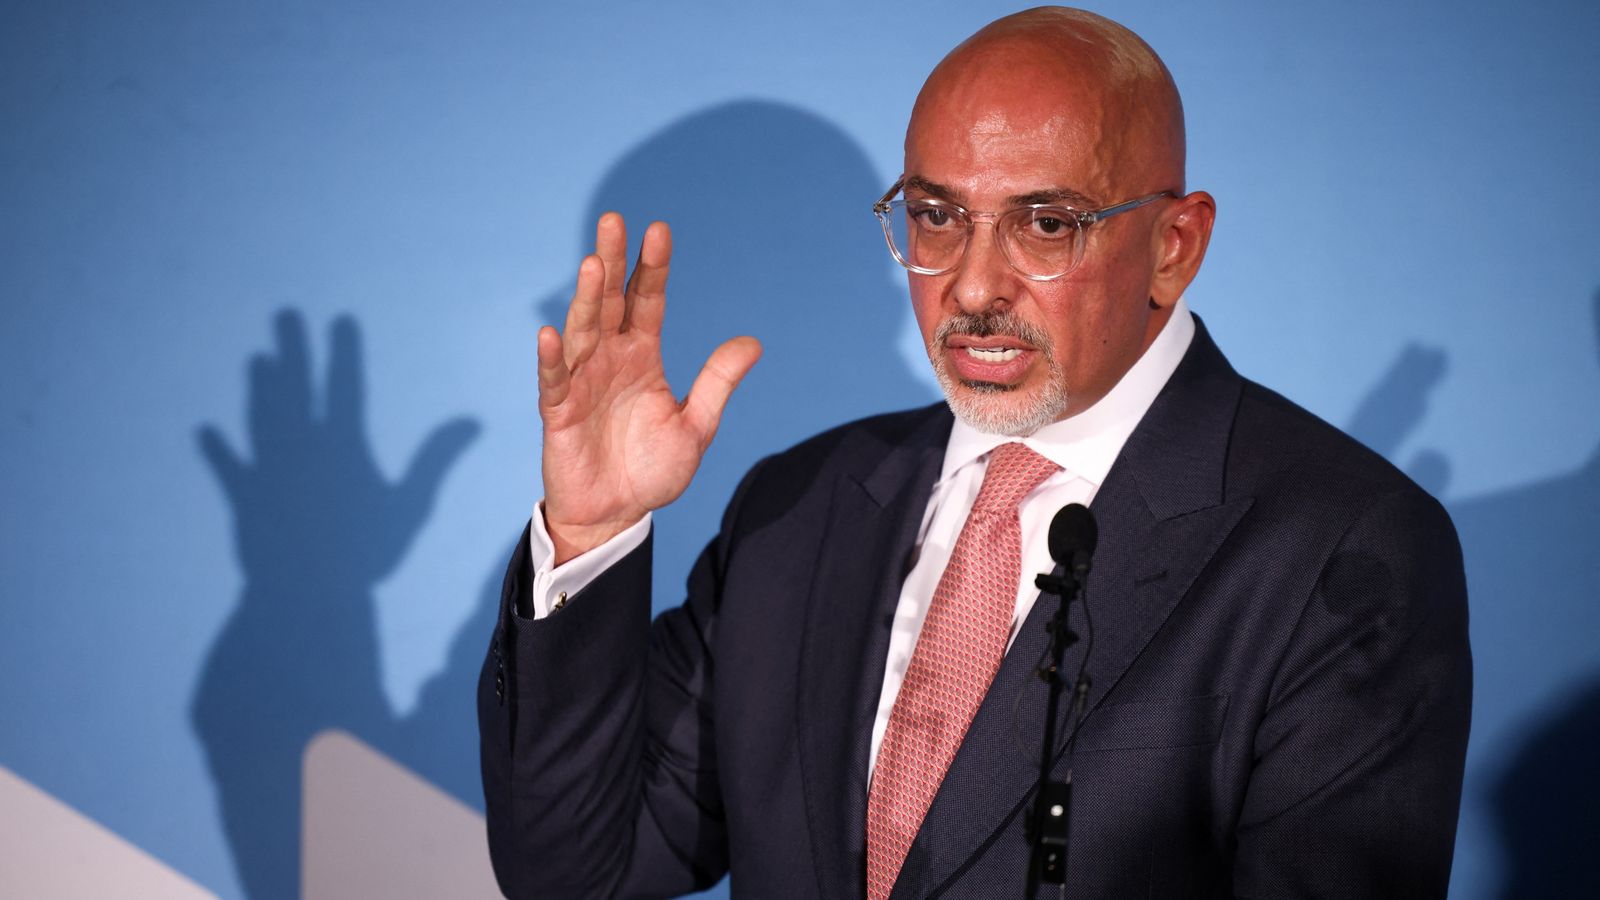 Nadhim Zahawi settled tax issue with HMRC while he was chancellor, Sky News told